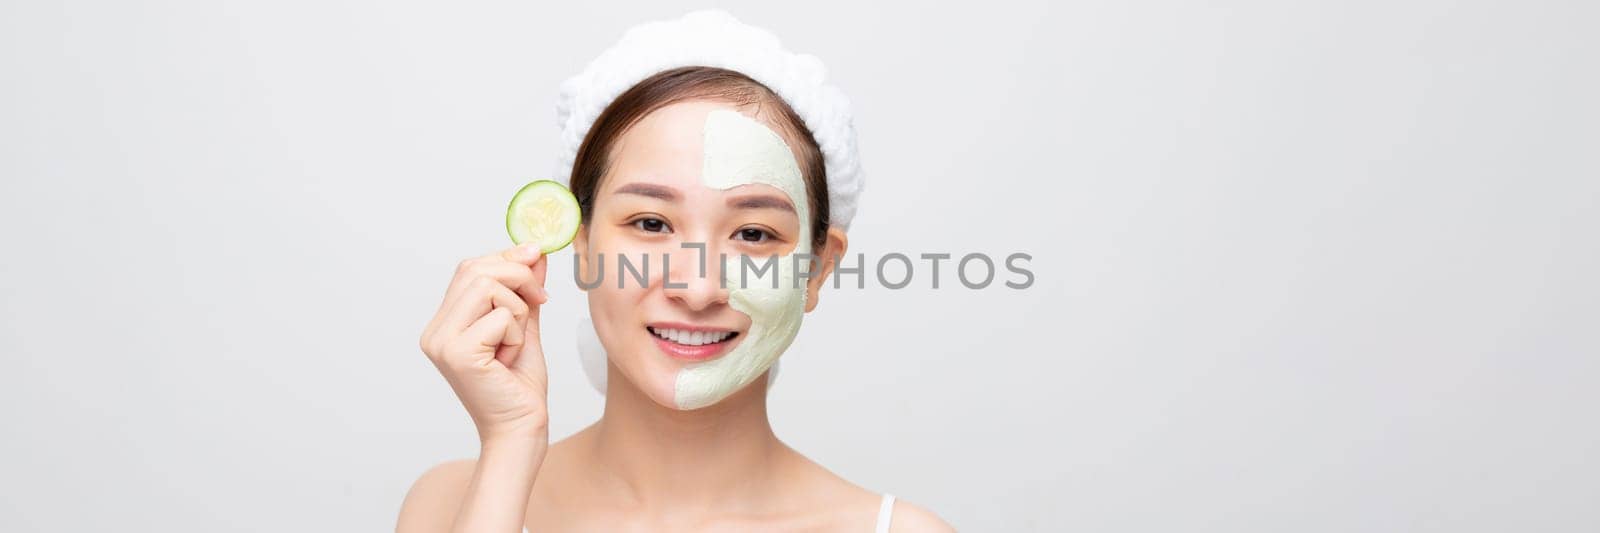 cheerful woman with clay mask on half of face smiling isolated on web banner by makidotvn